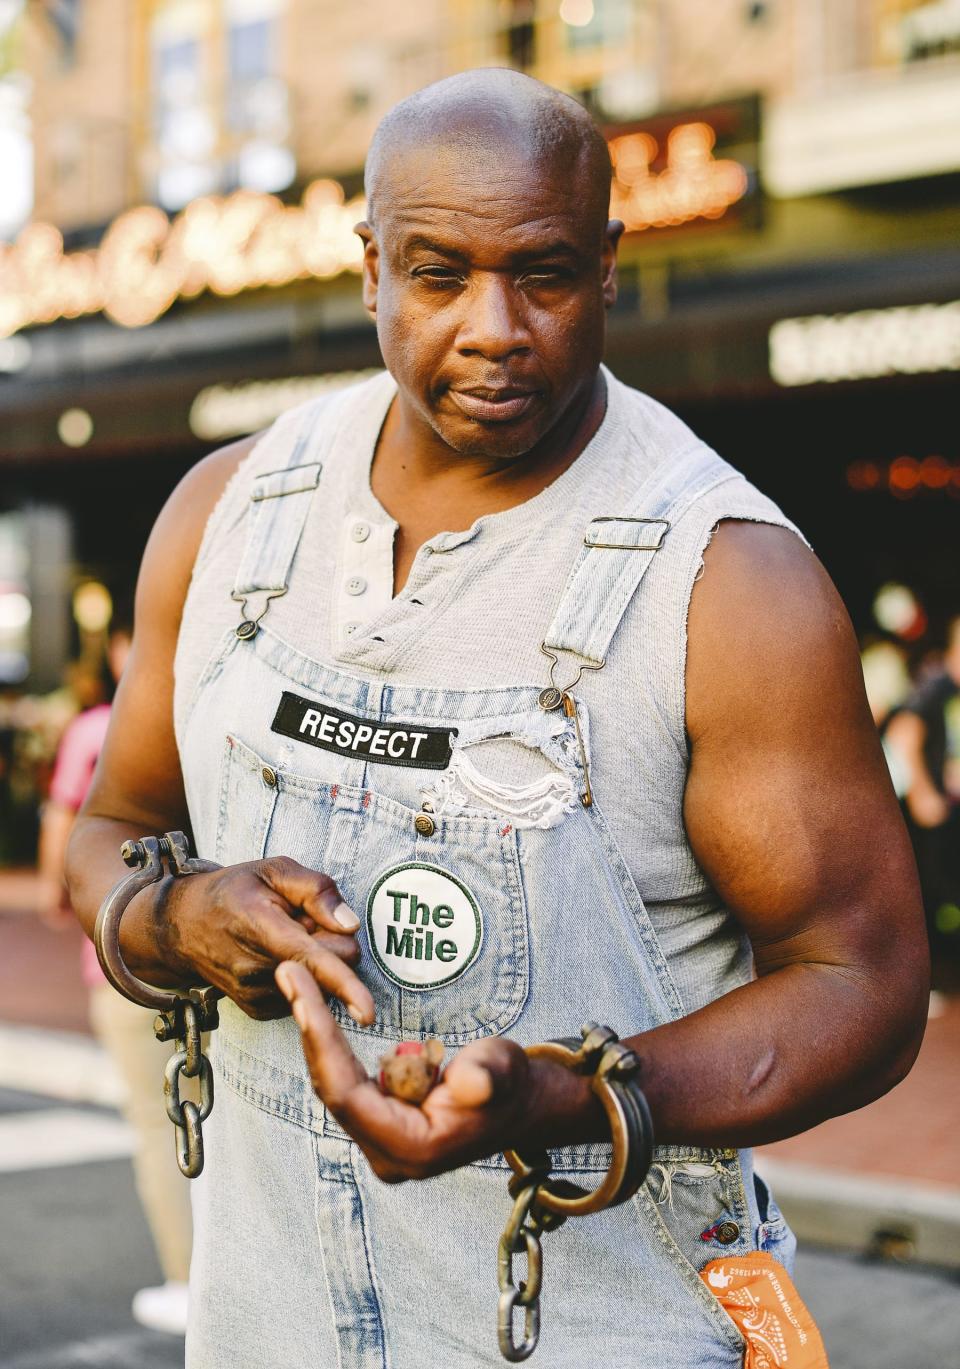 John Coffey from The Green Mile cosplayer